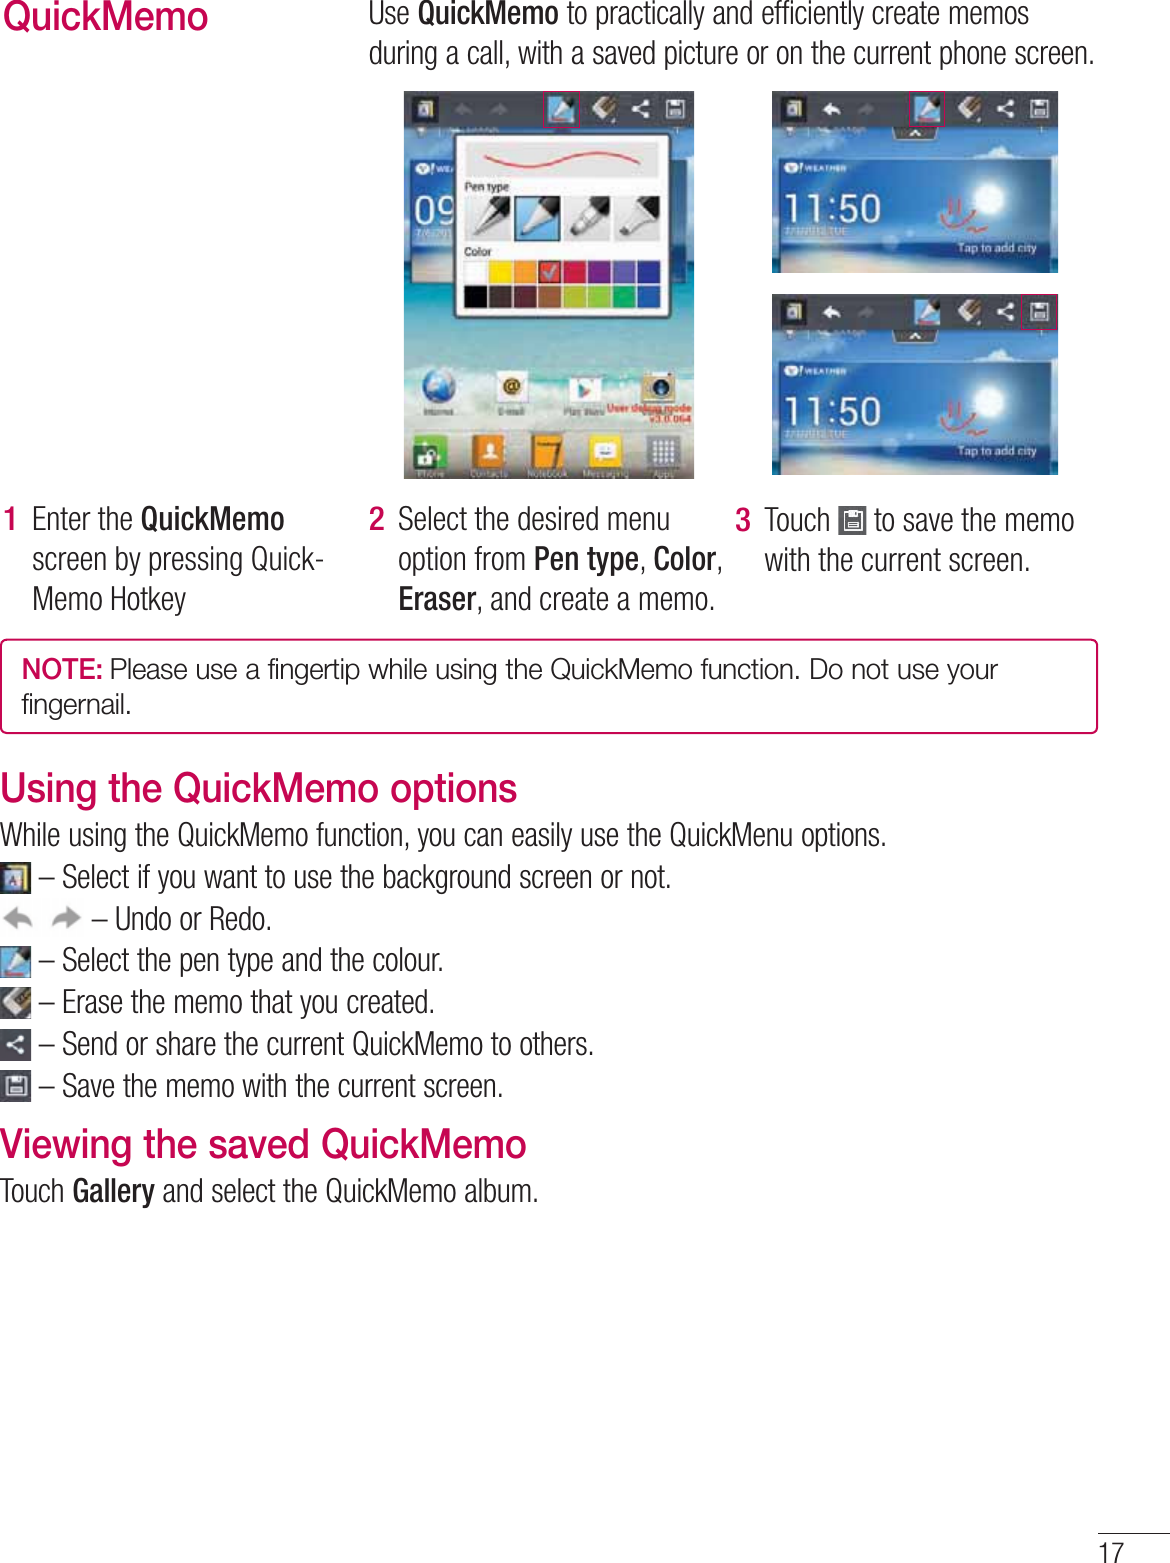 17QuickMemoUse QuickMemo to practically and efficiently create memos during a call, with a saved picture or on the current phone screen.Enter the QuickMemo screen by pressing Quick-Memo Hotkey 1 Select the desired menu option from Pen type, Color, Eraser, and create a memo.2 Touch   to save the memo with the current screen.3 NOTE: Please use a fingertip while using the QuickMemo function. Do not use your fingernail.Using the QuickMemo optionsWhile using the QuickMemo function, you can easily use the QuickMenu options. –  Select if you want to use the background screen or not. – Undo or Redo. – Select the pen type and the colour. –  Erase the memo that you created. –  Send or share the current QuickMemo to others. –  Save the memo with the current screen.Viewing the saved QuickMemo Touch Gallery and select the QuickMemo album.